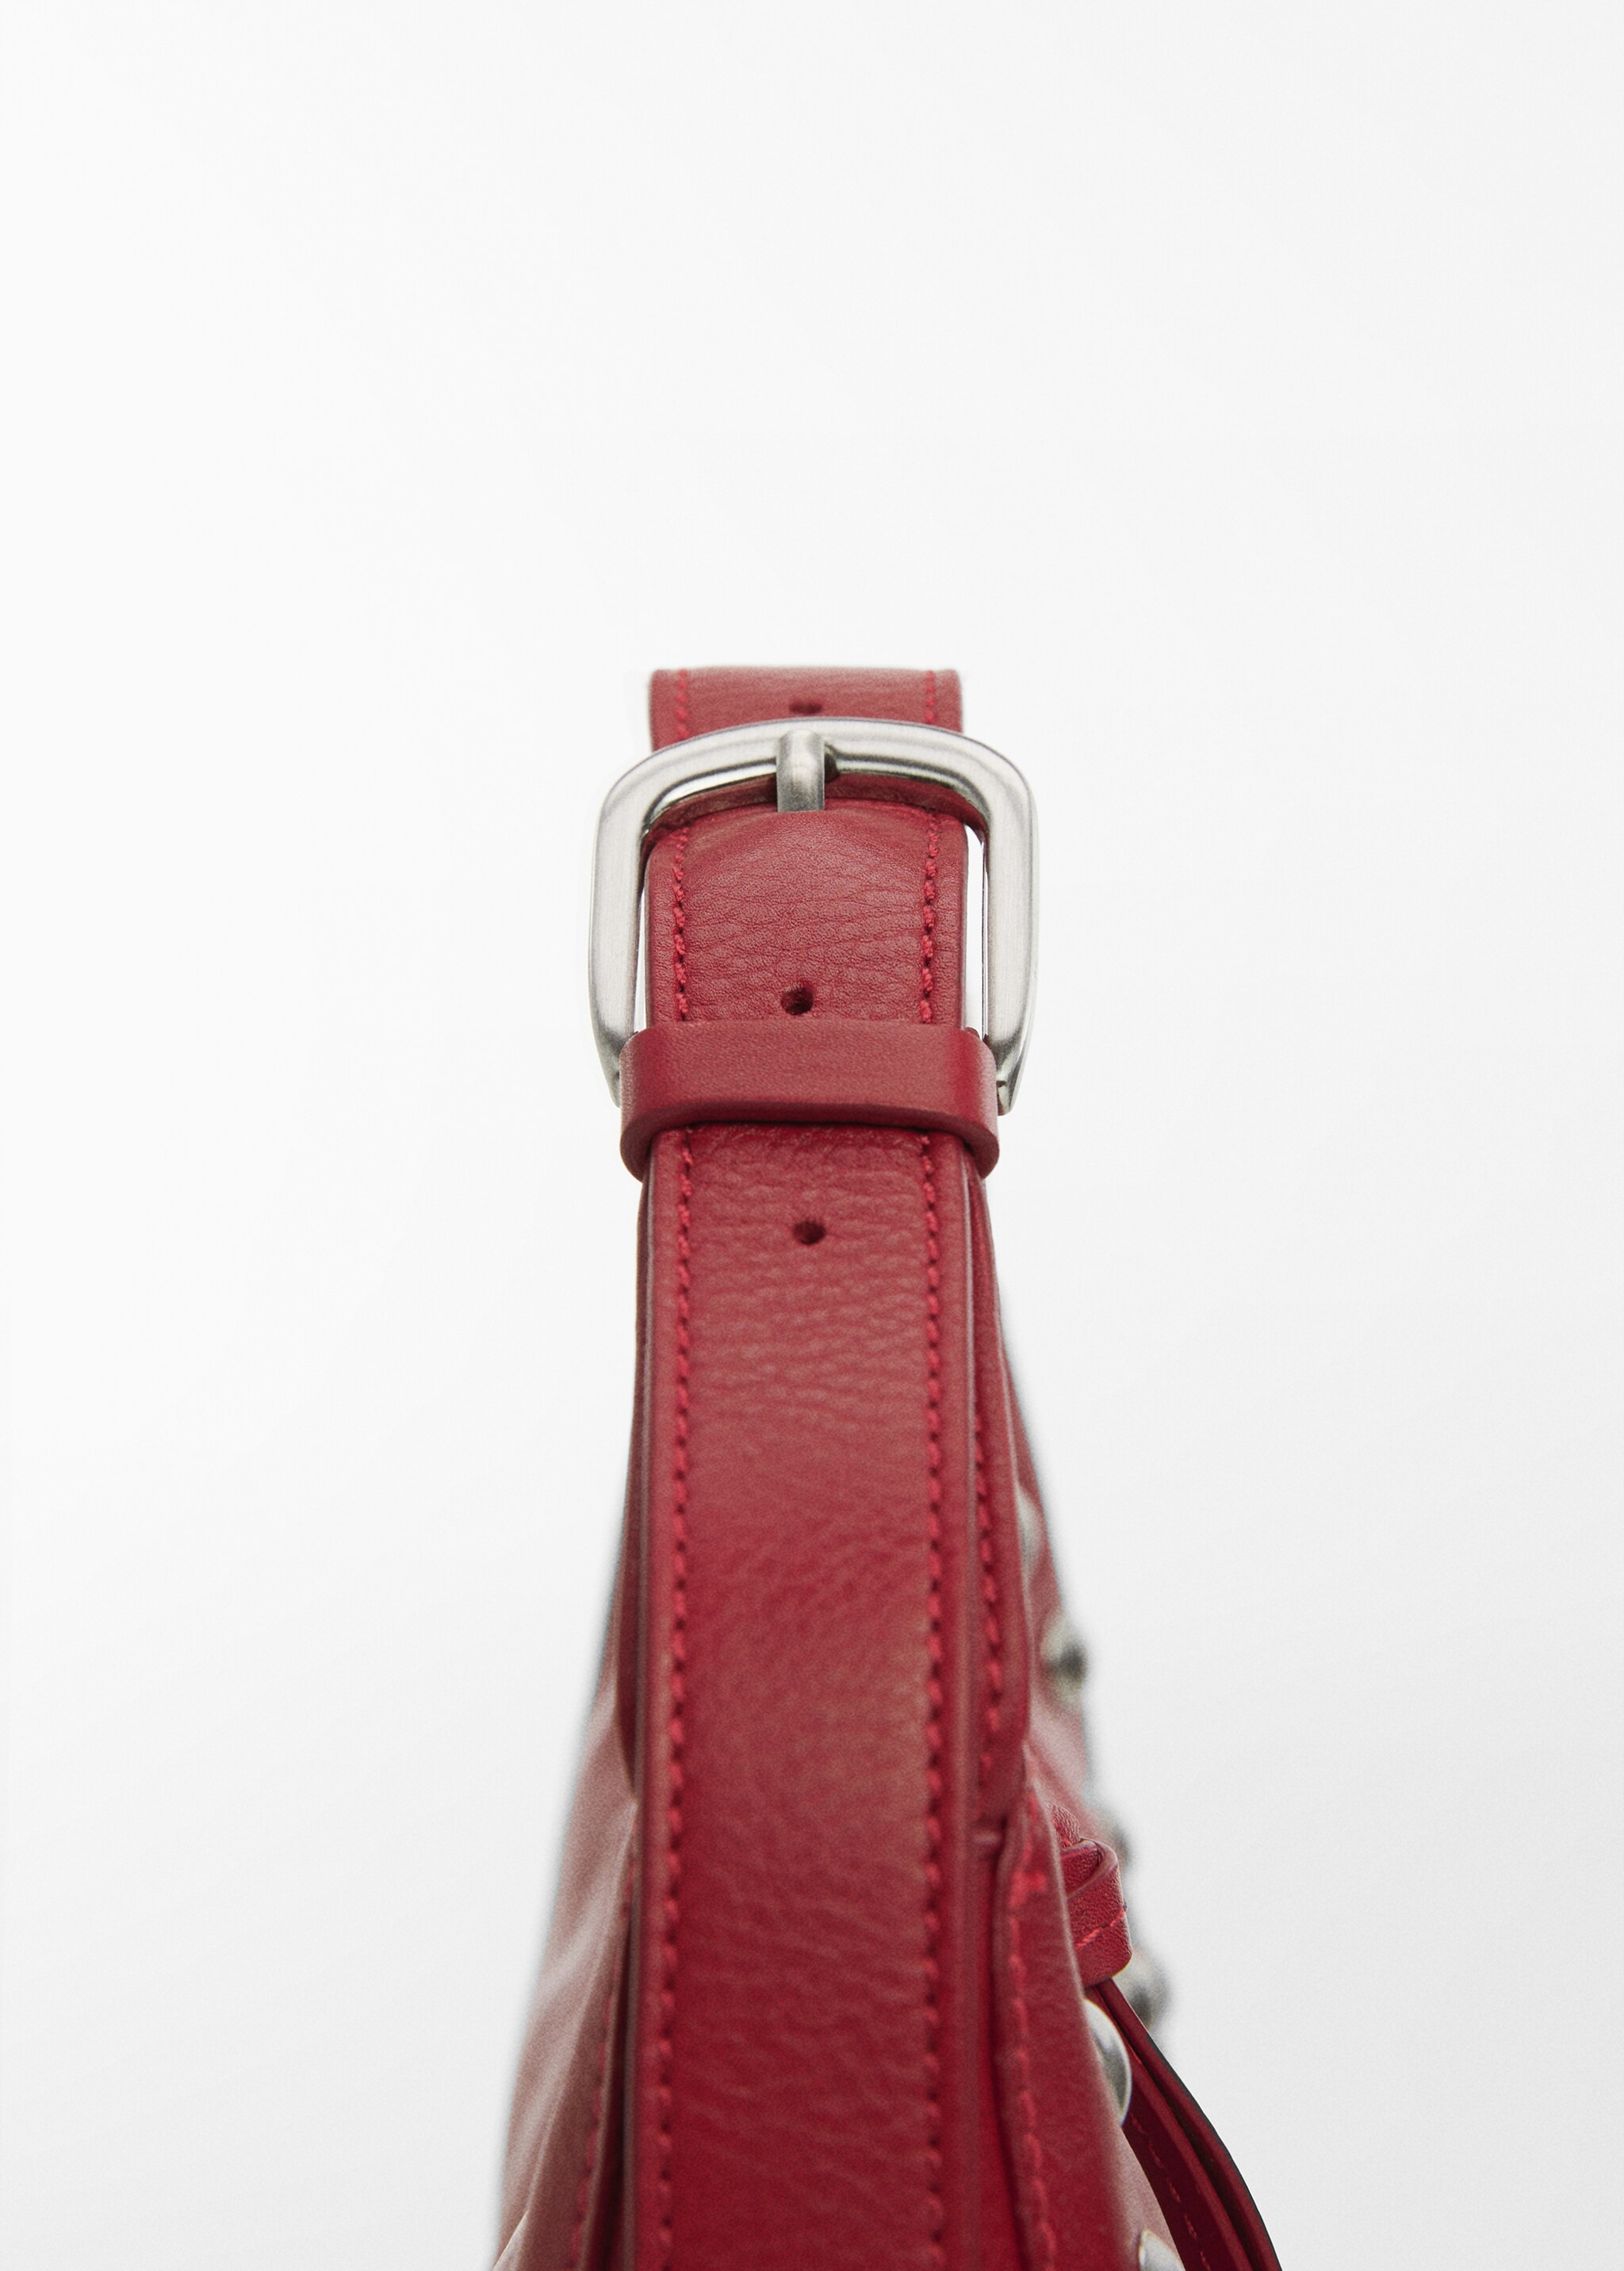 Stud leather bag - Details of the article 1